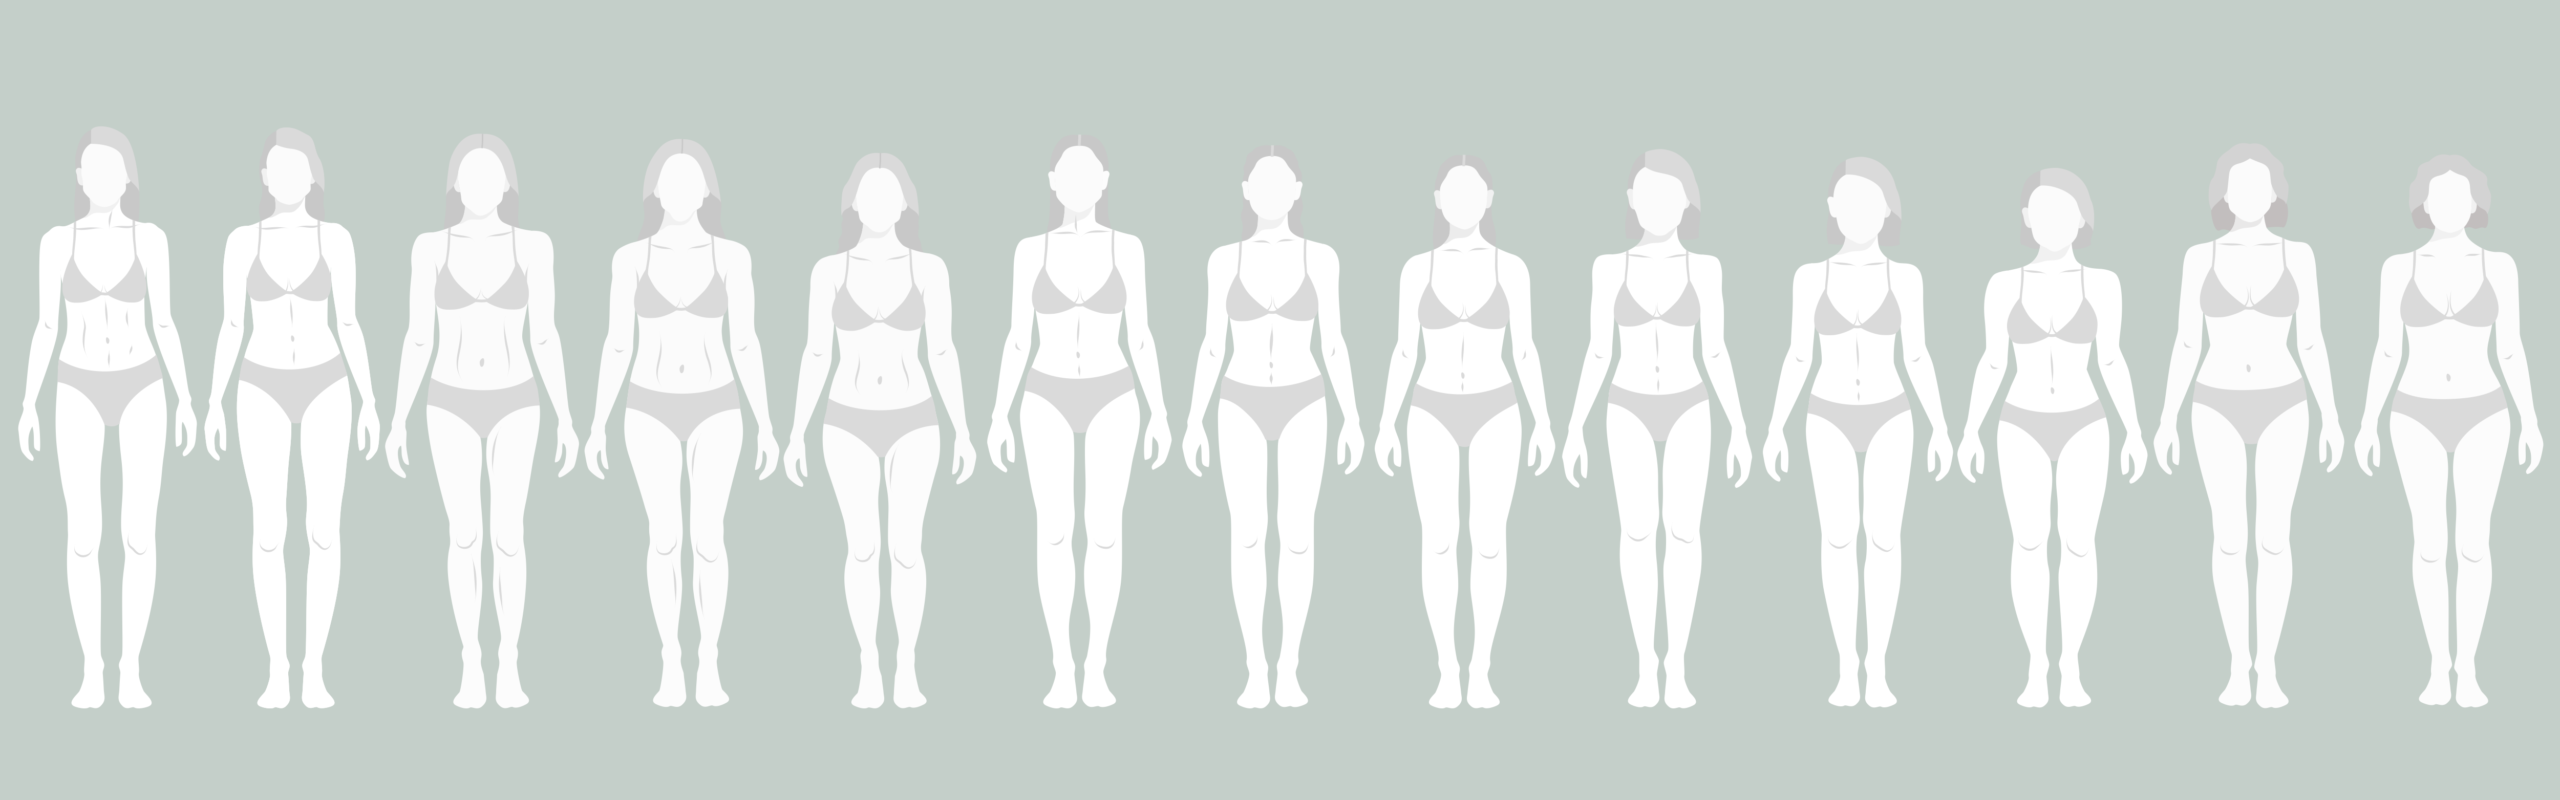 13 Kibbe Body Types and How To Style Them - Our Fashion Garden